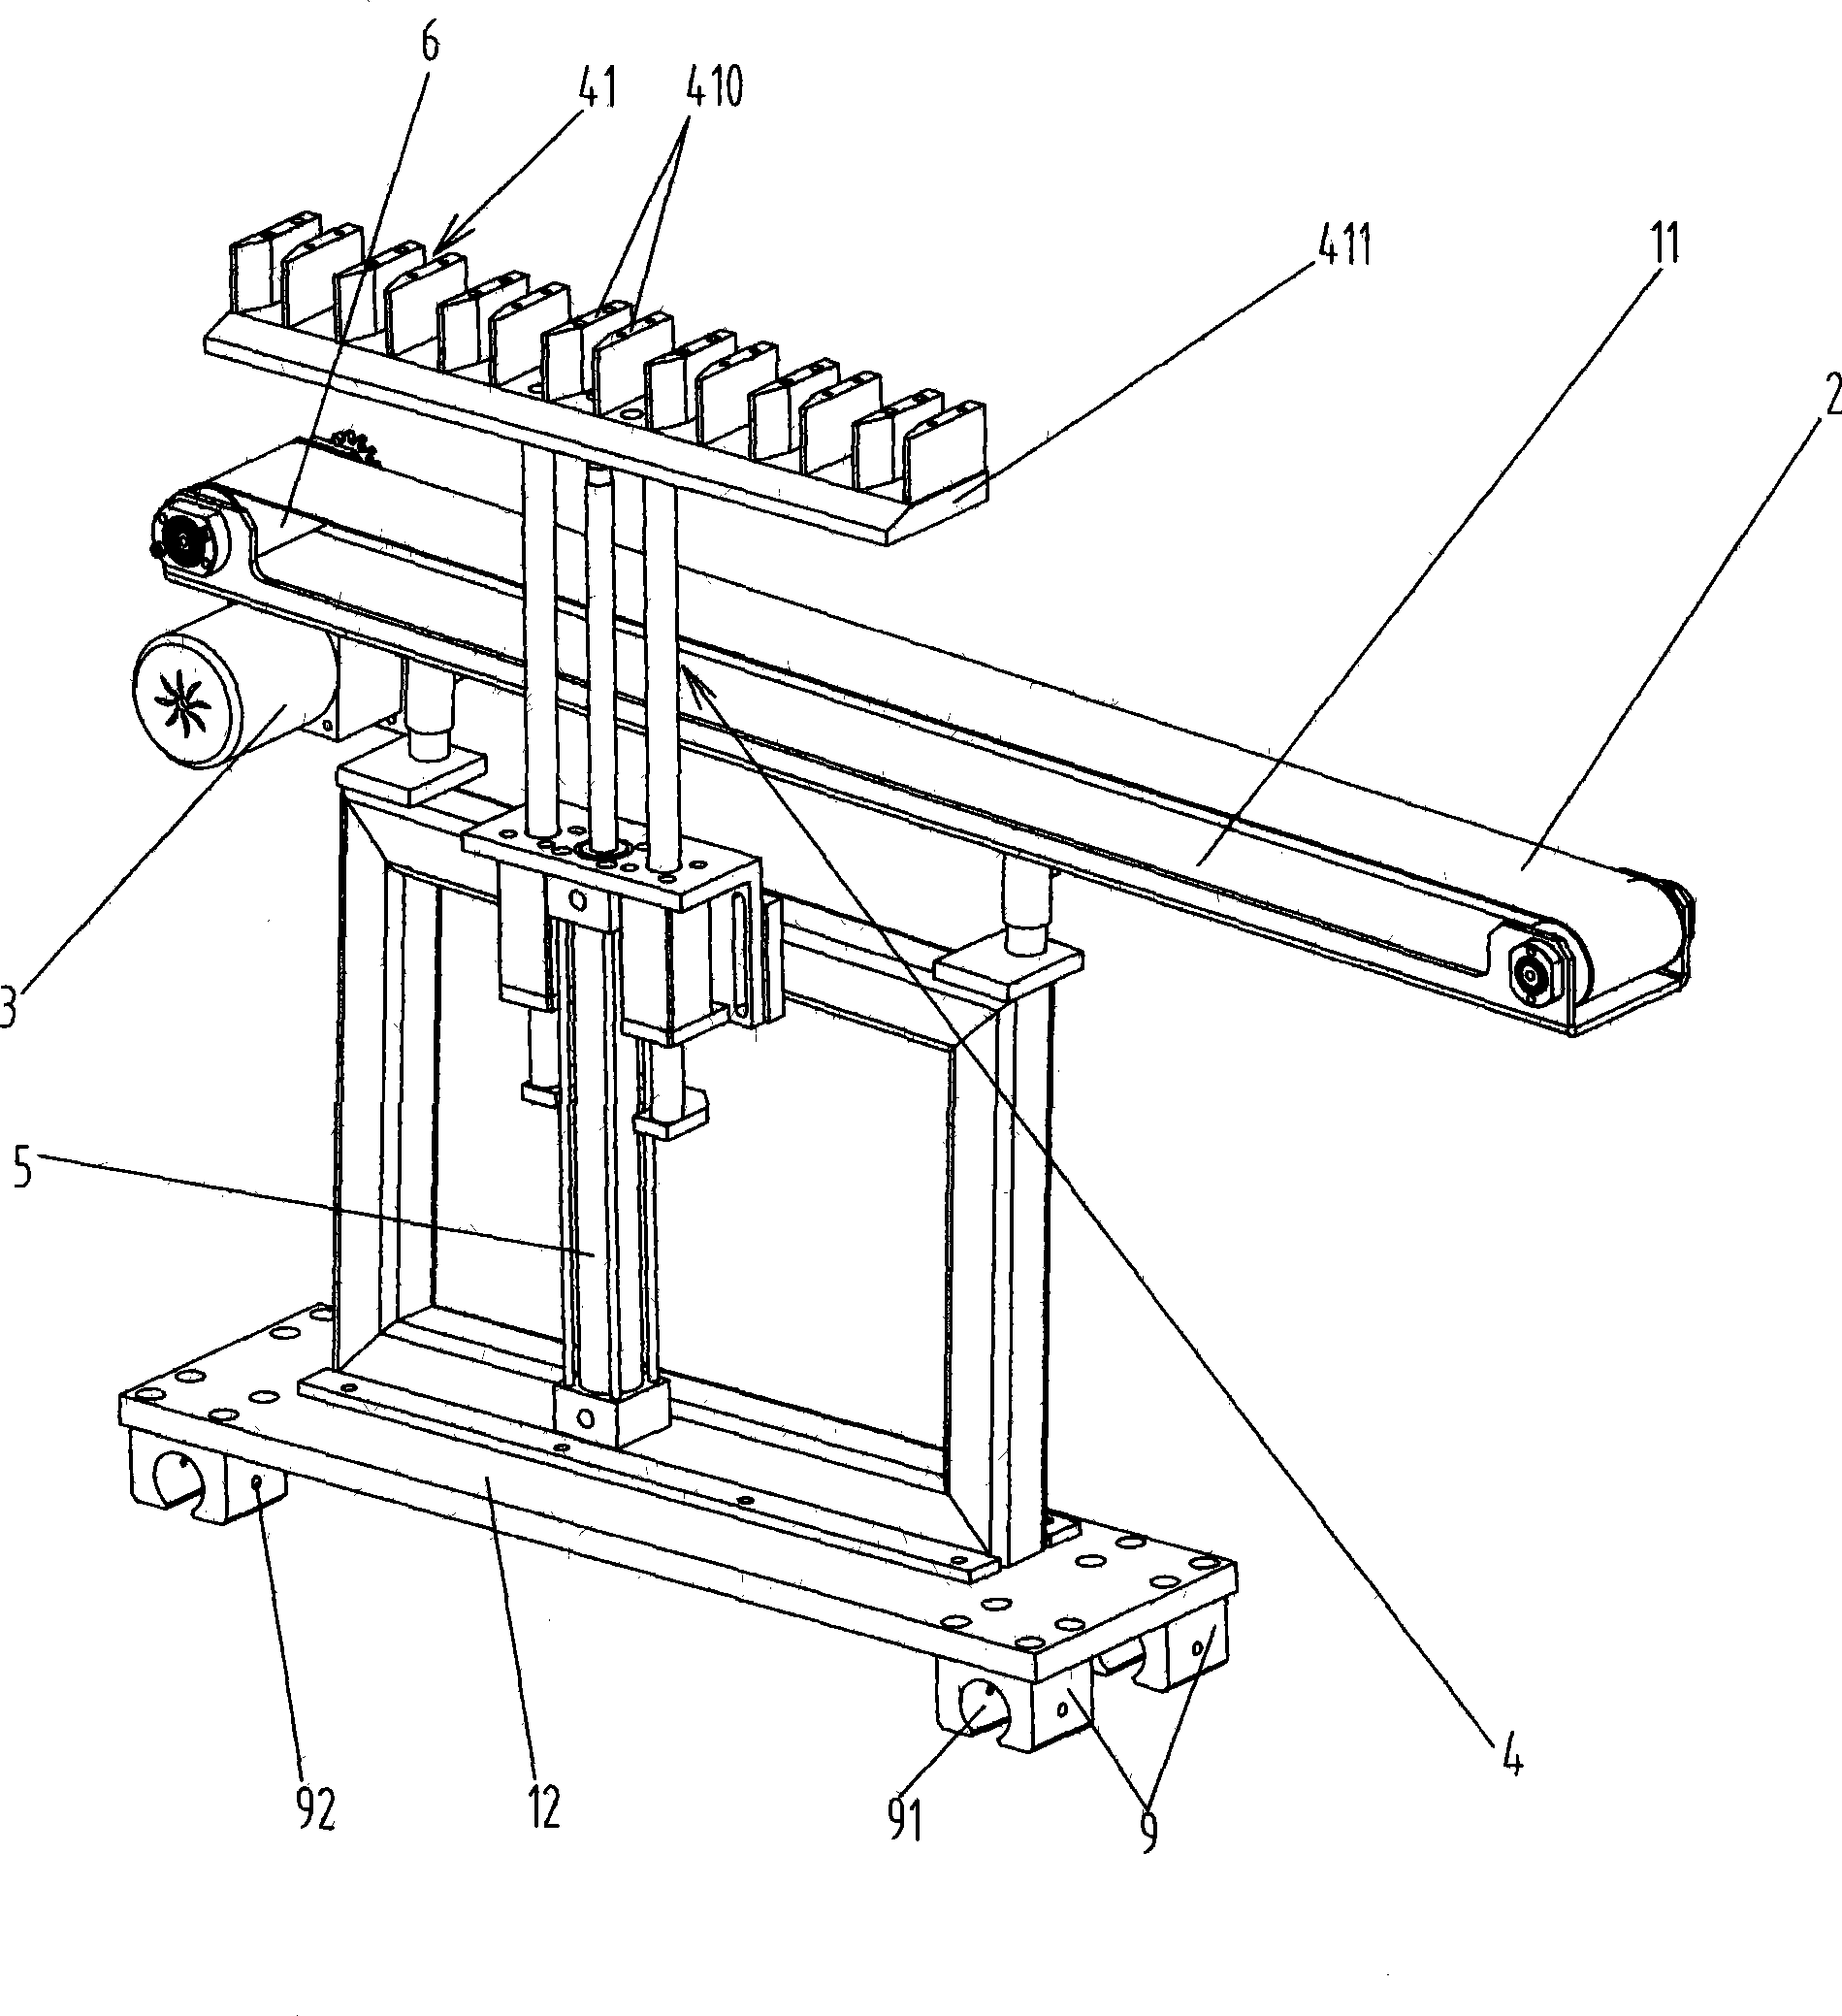 Material receiving mechanism for conveying pipe fitting